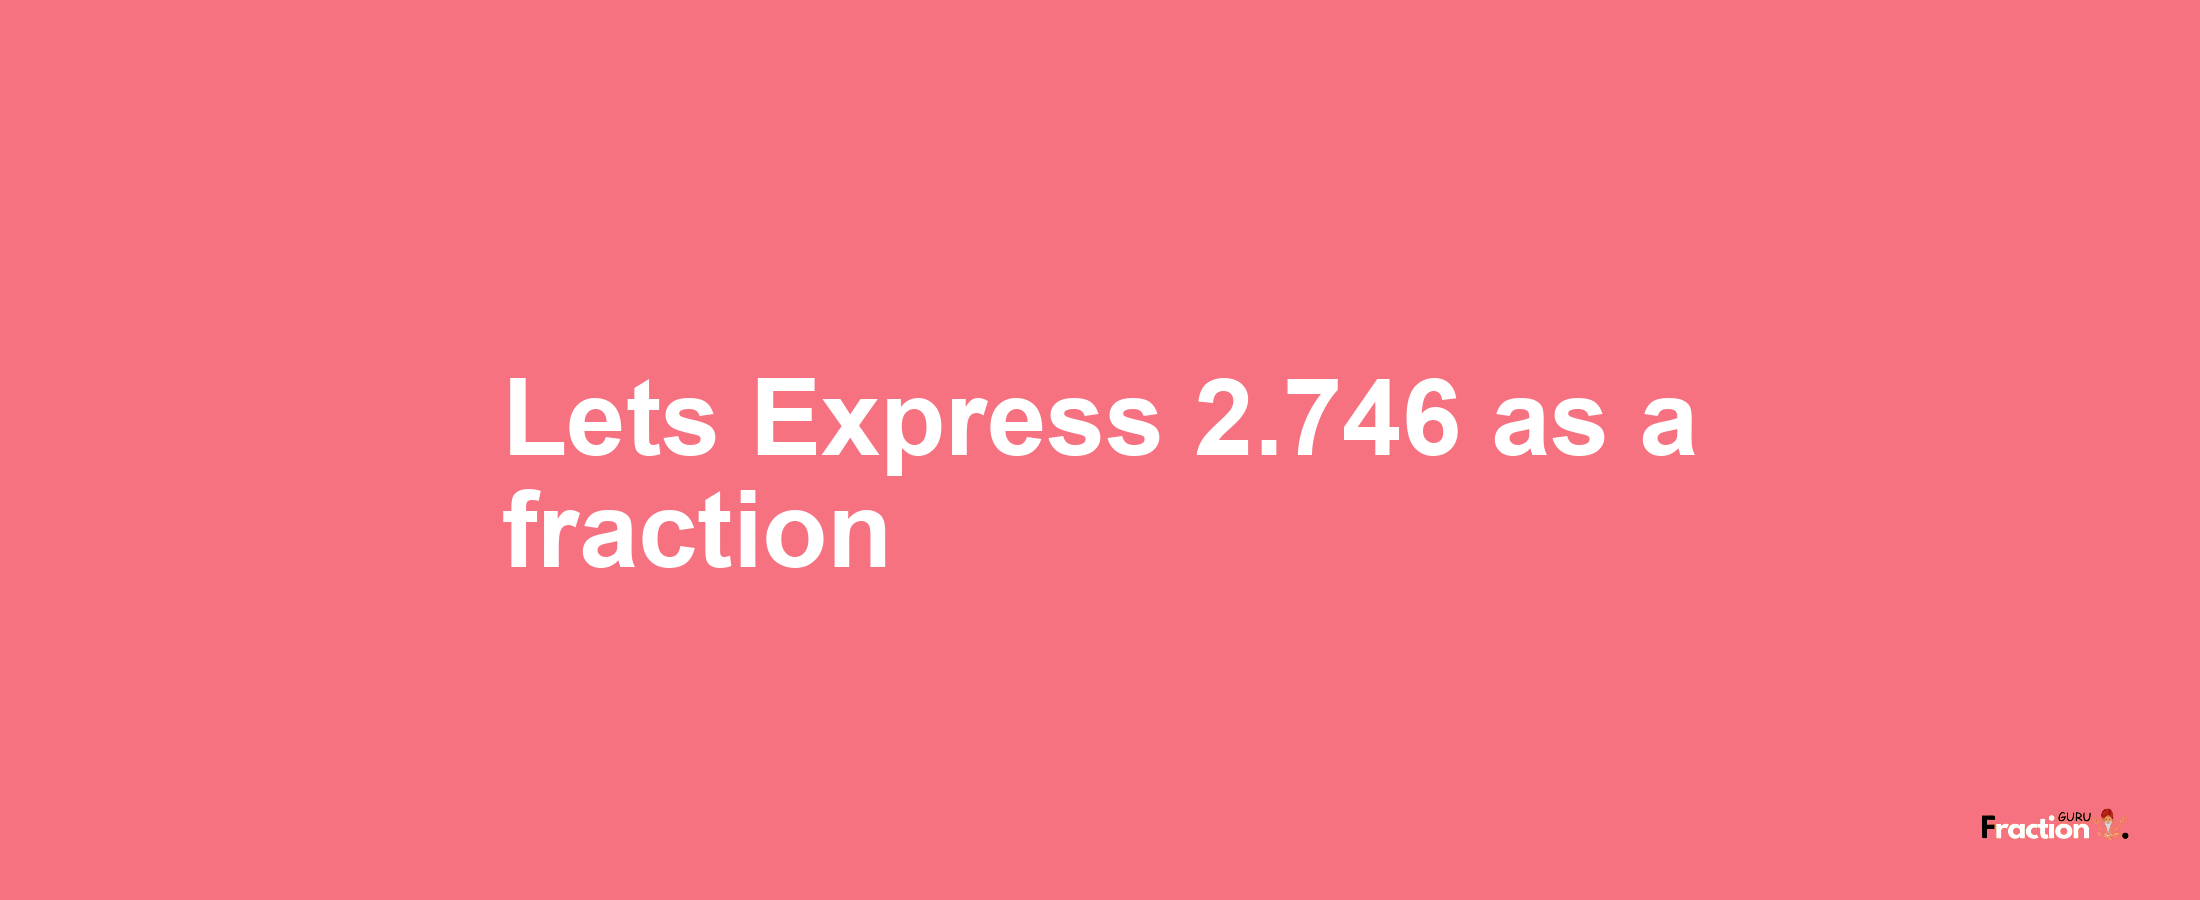 Lets Express 2.746 as afraction